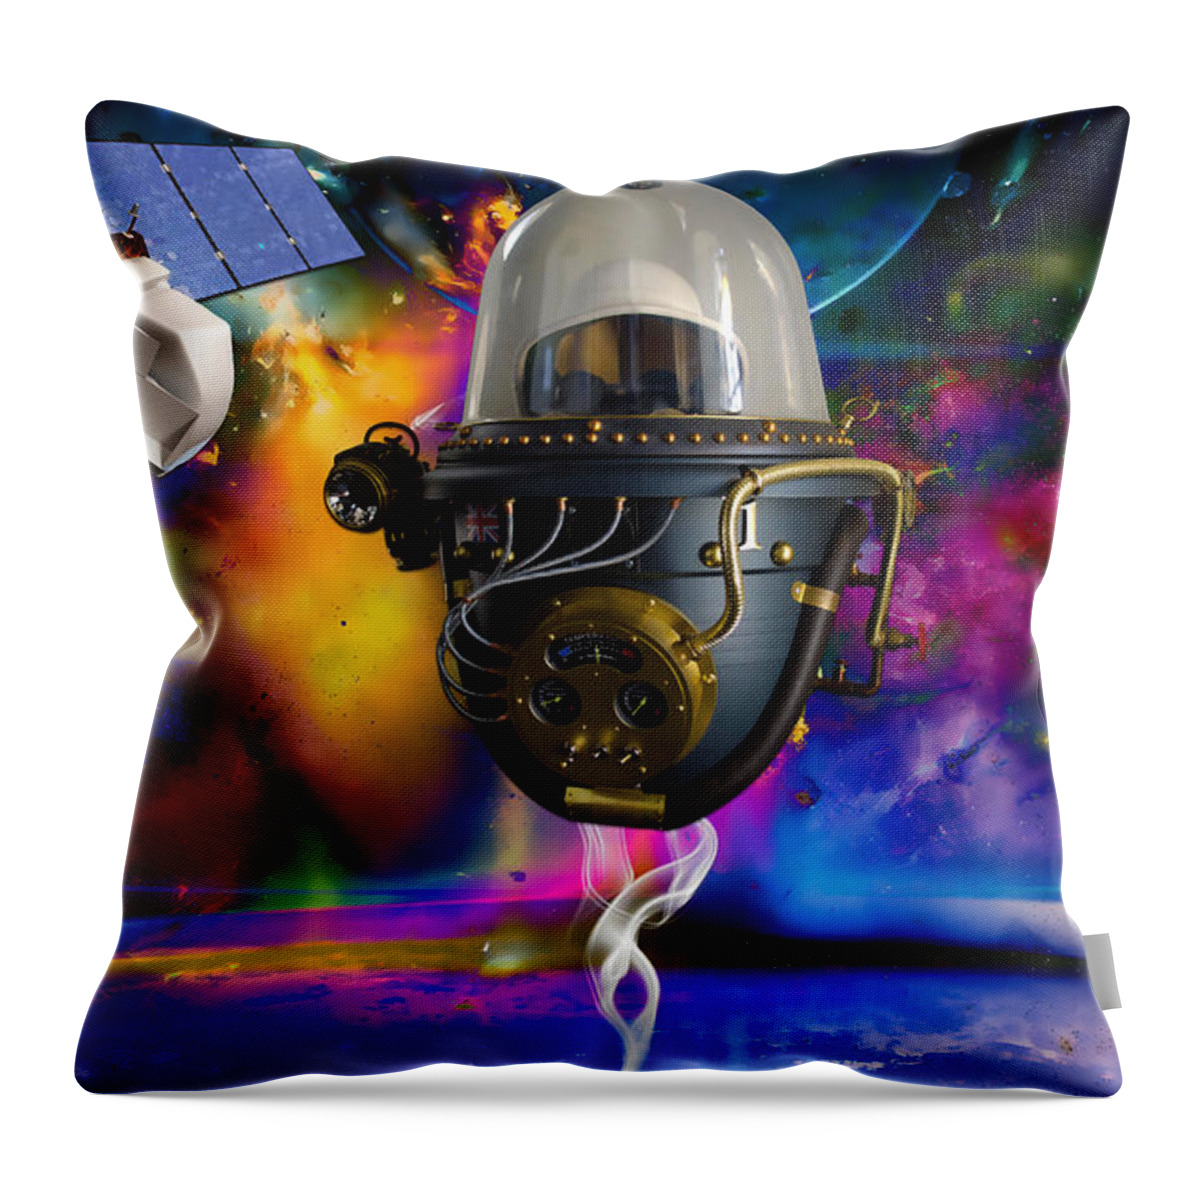 Fantasy Throw Pillow featuring the mixed media Bending Time by Marvin Blaine